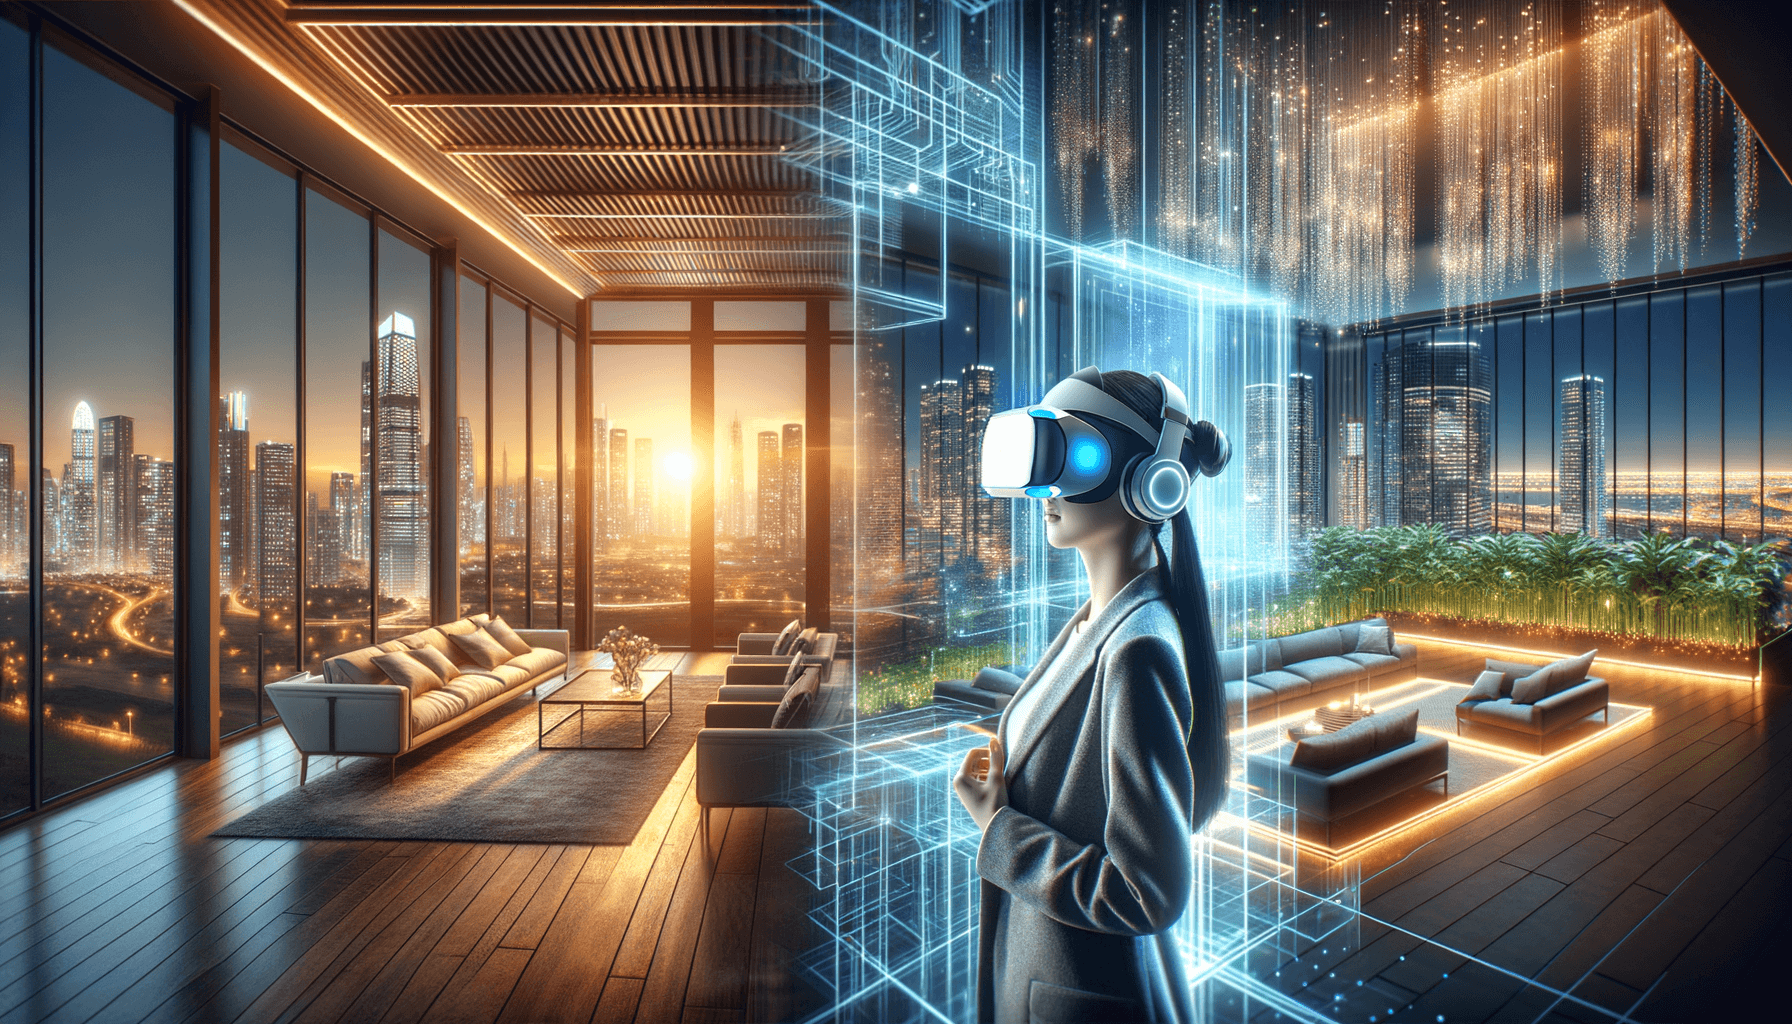 "Immerse in Tomorrow: Explore Real Estate and Hospitality in High Definition through VR - The $2.6 Billion Future Unveiled"